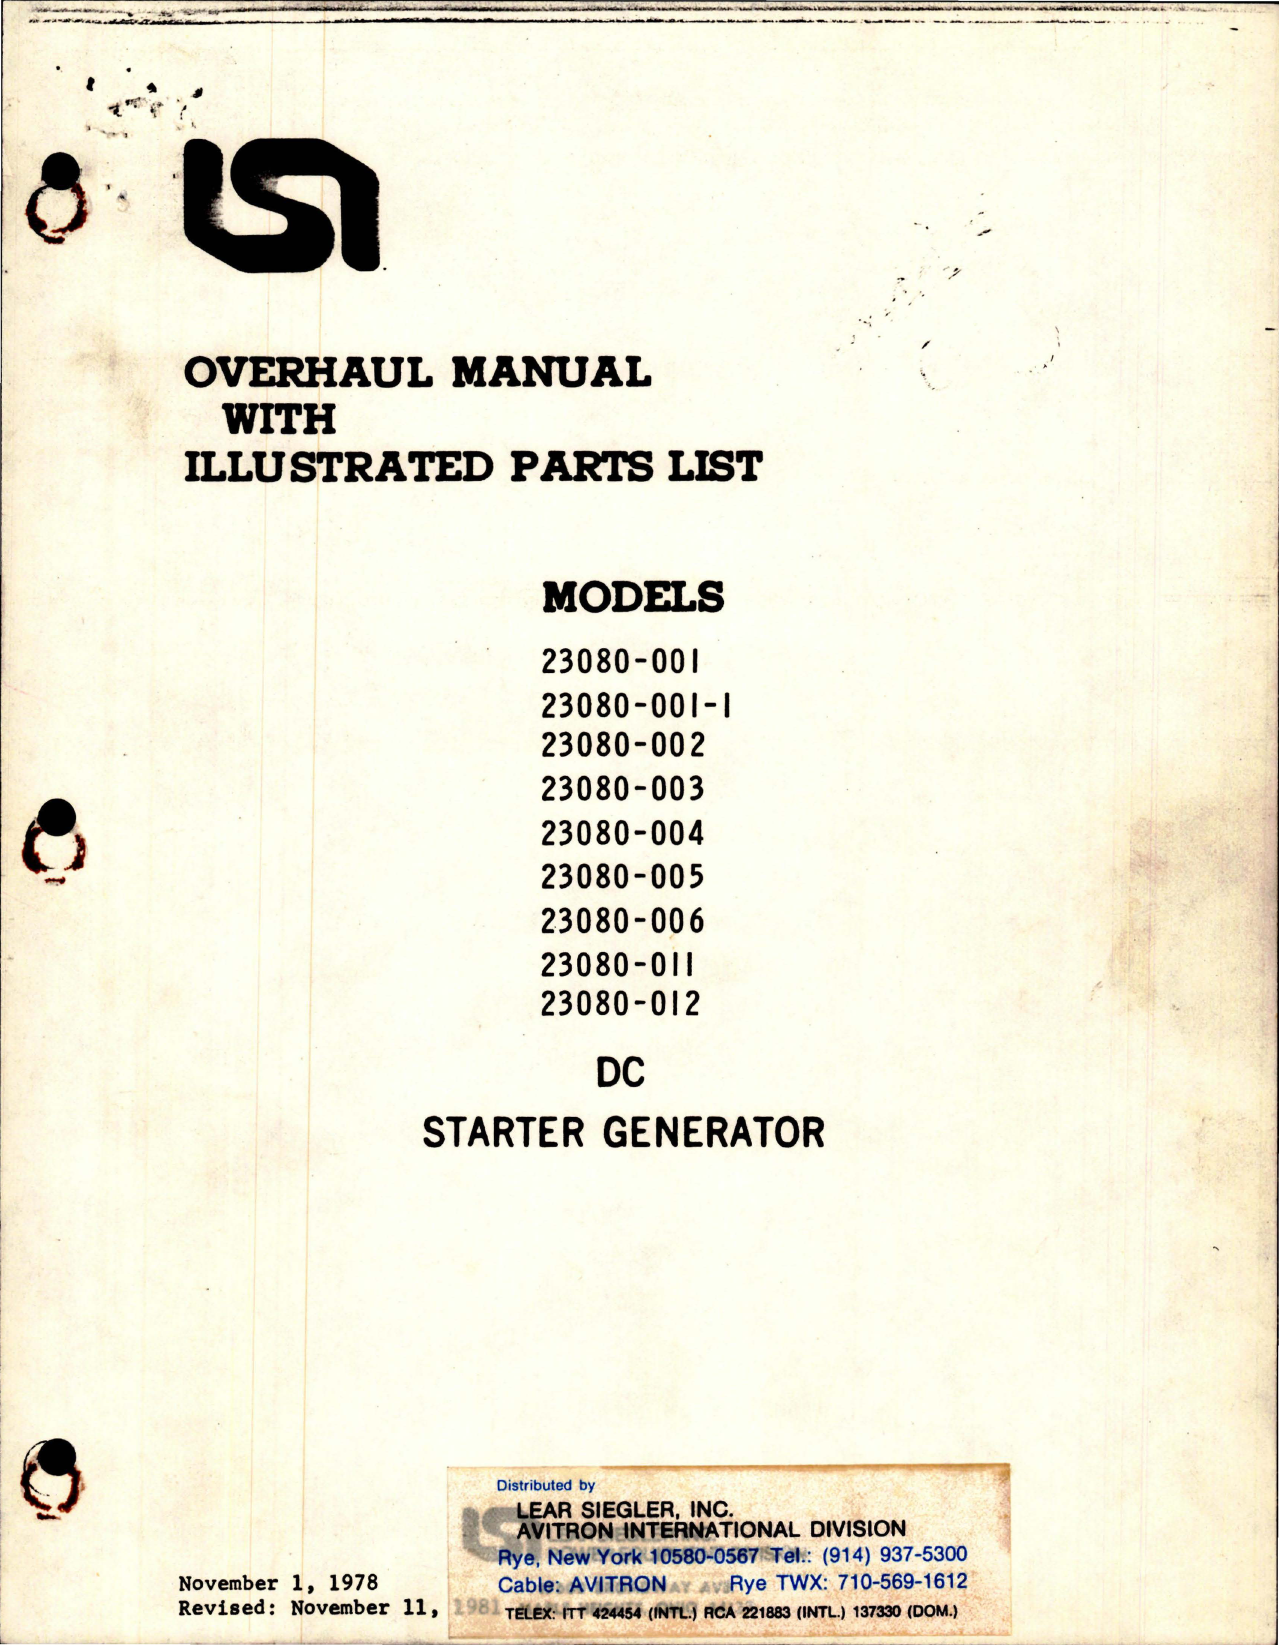 Sample page 1 from AirCorps Library document: Overhaul Manual with Illustrated Parts List for DC Starter Generator - Model 23080 Series